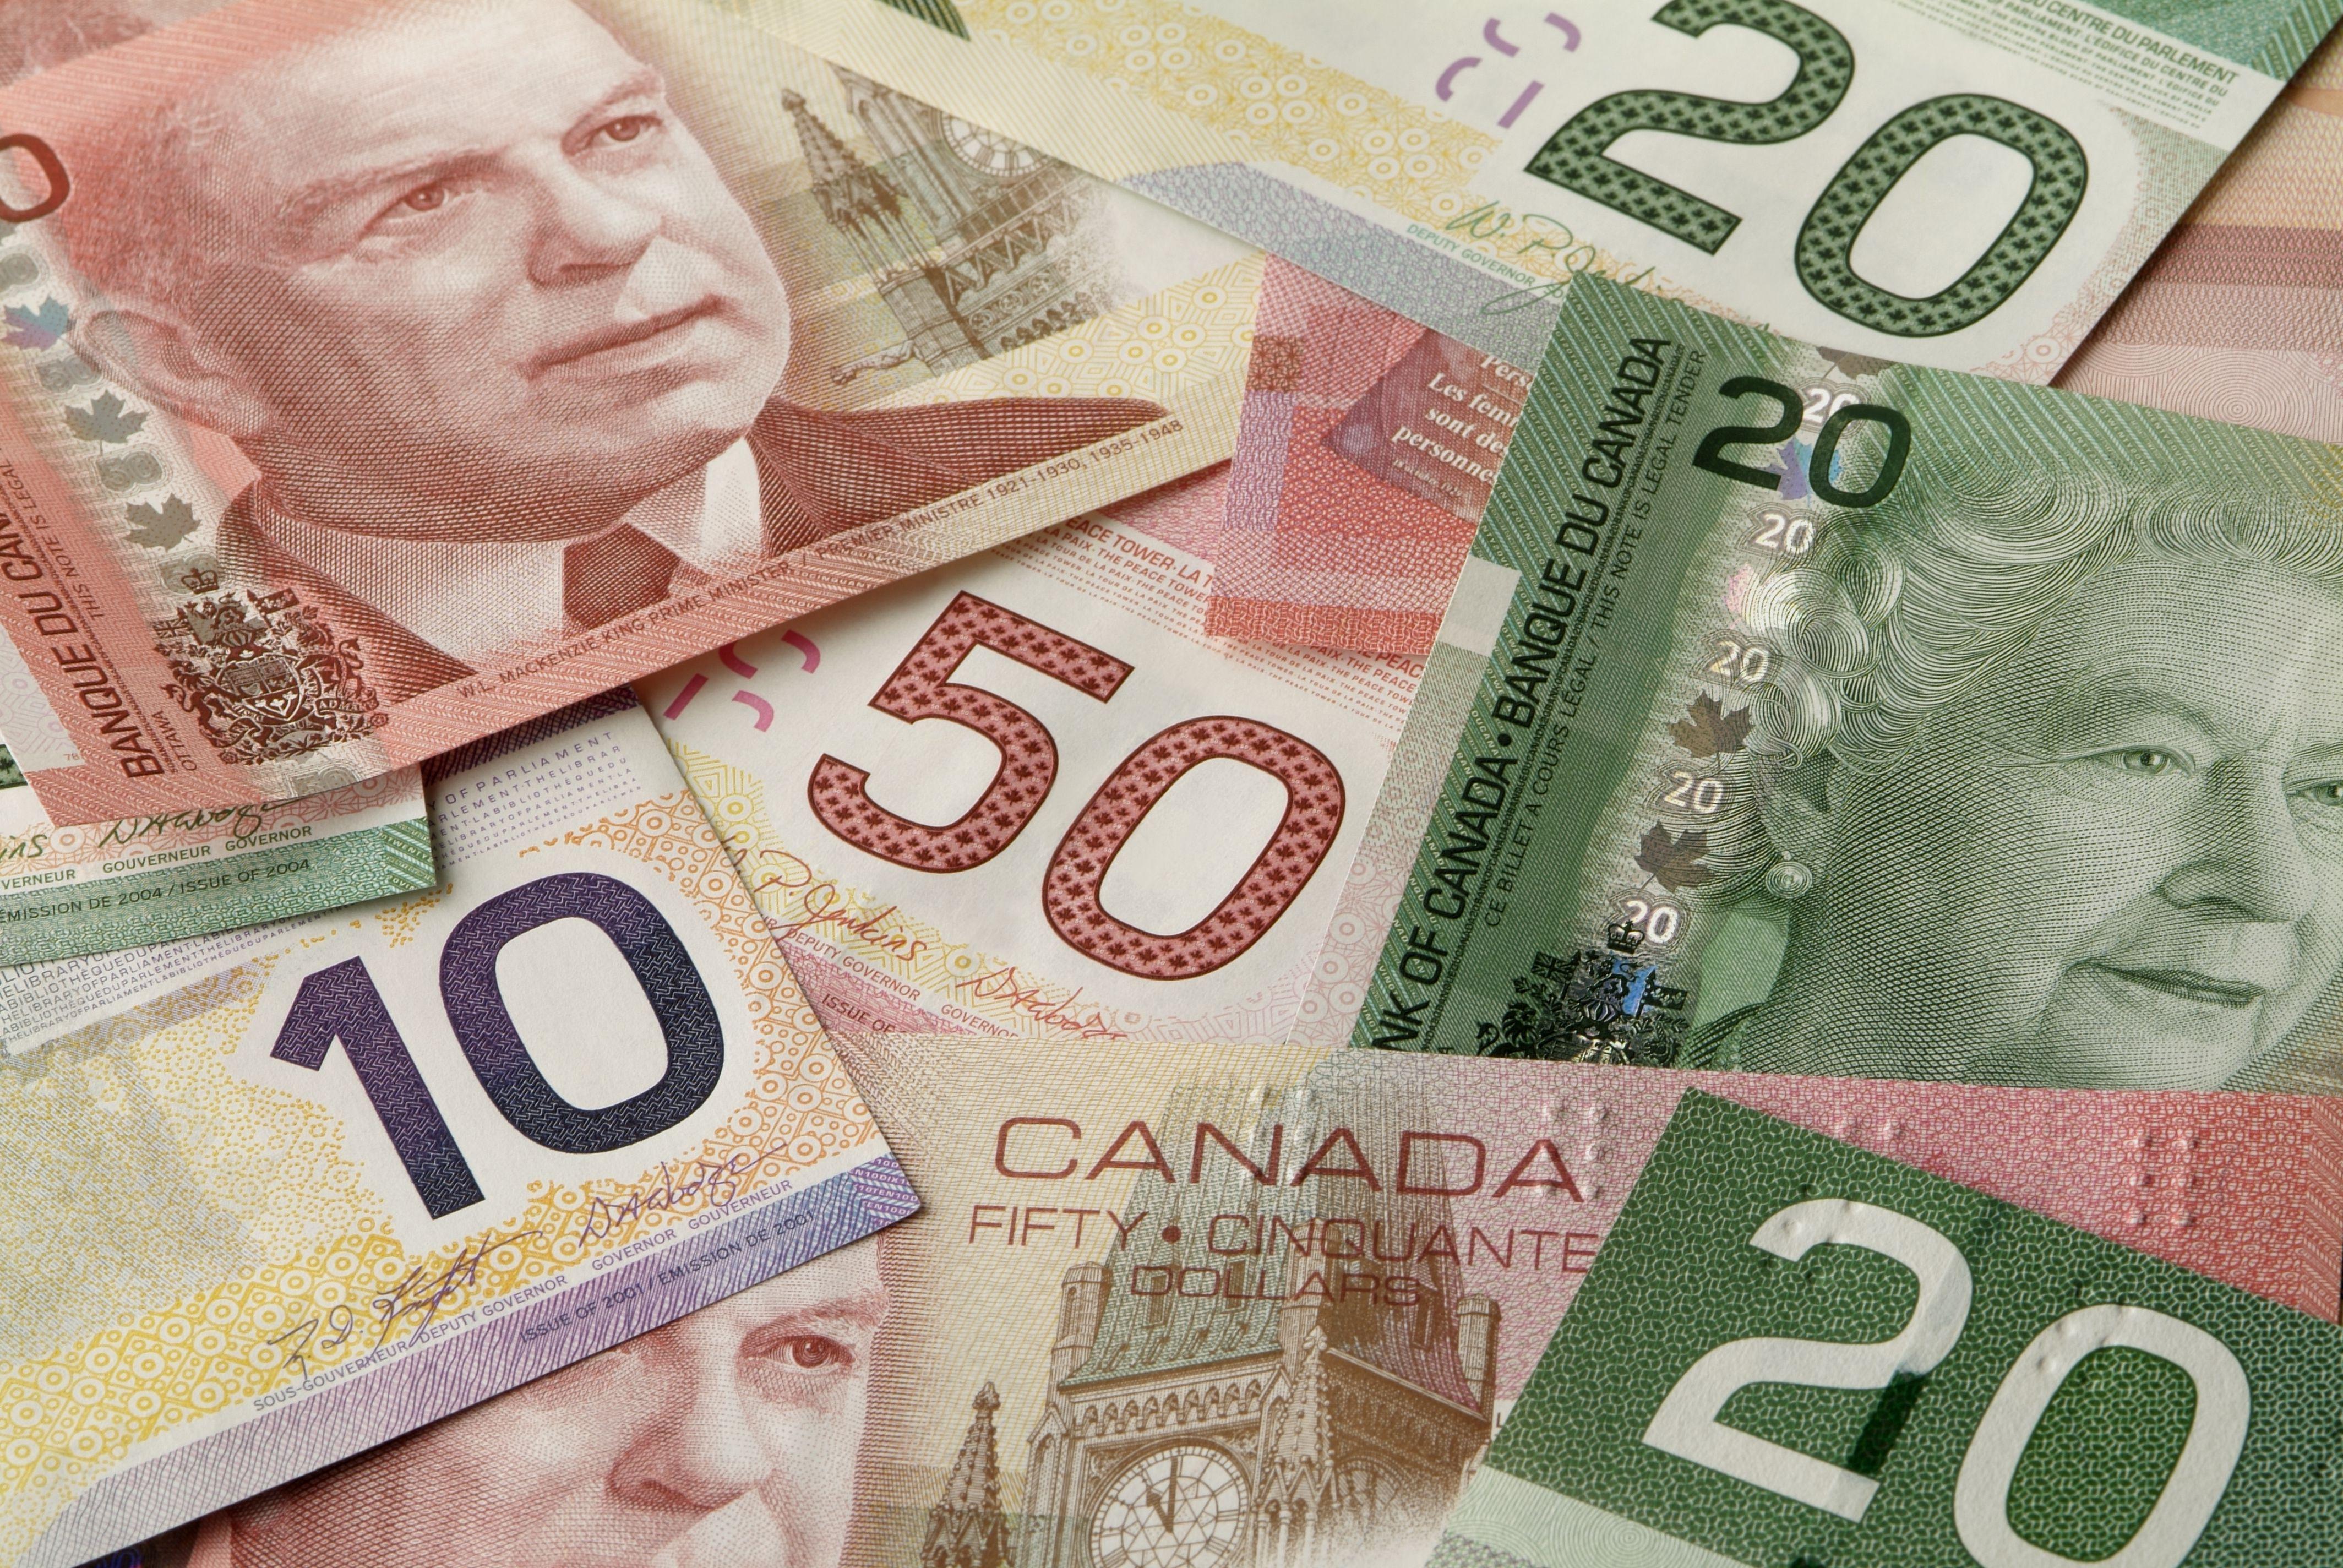 Canadian dollar Images and Stock Photos 1636 Canadian dollar photography  and royalty free pictures available to download from thousands of stock  photo providers